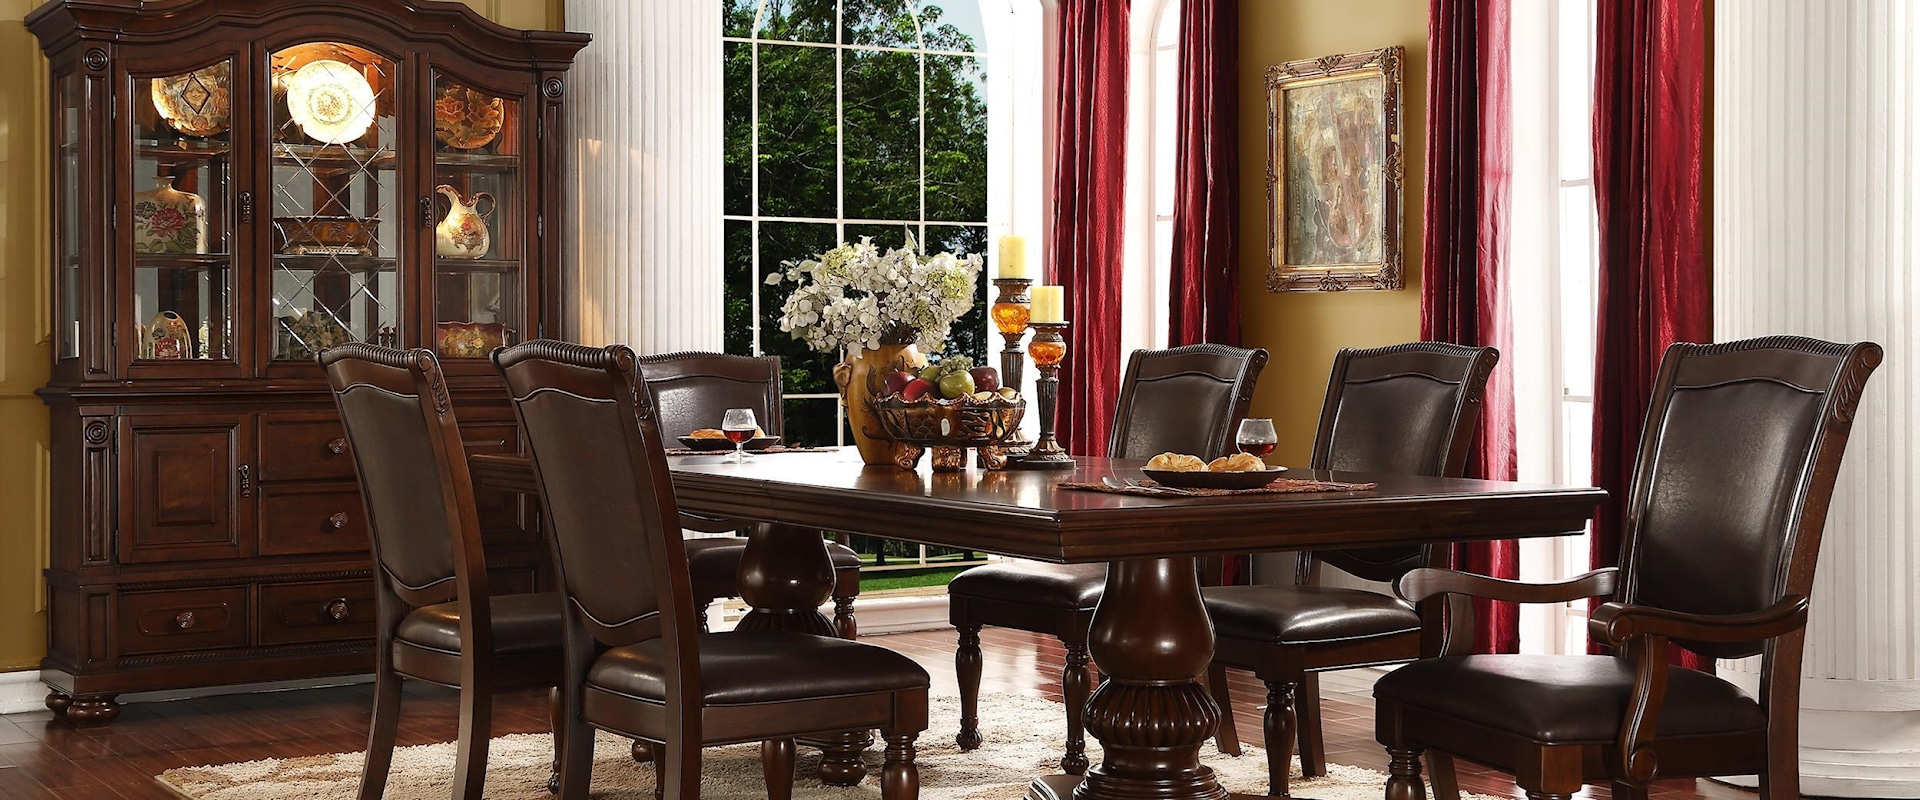 Brown Rich Wood Double Pedestal Dining 7PC Table Set